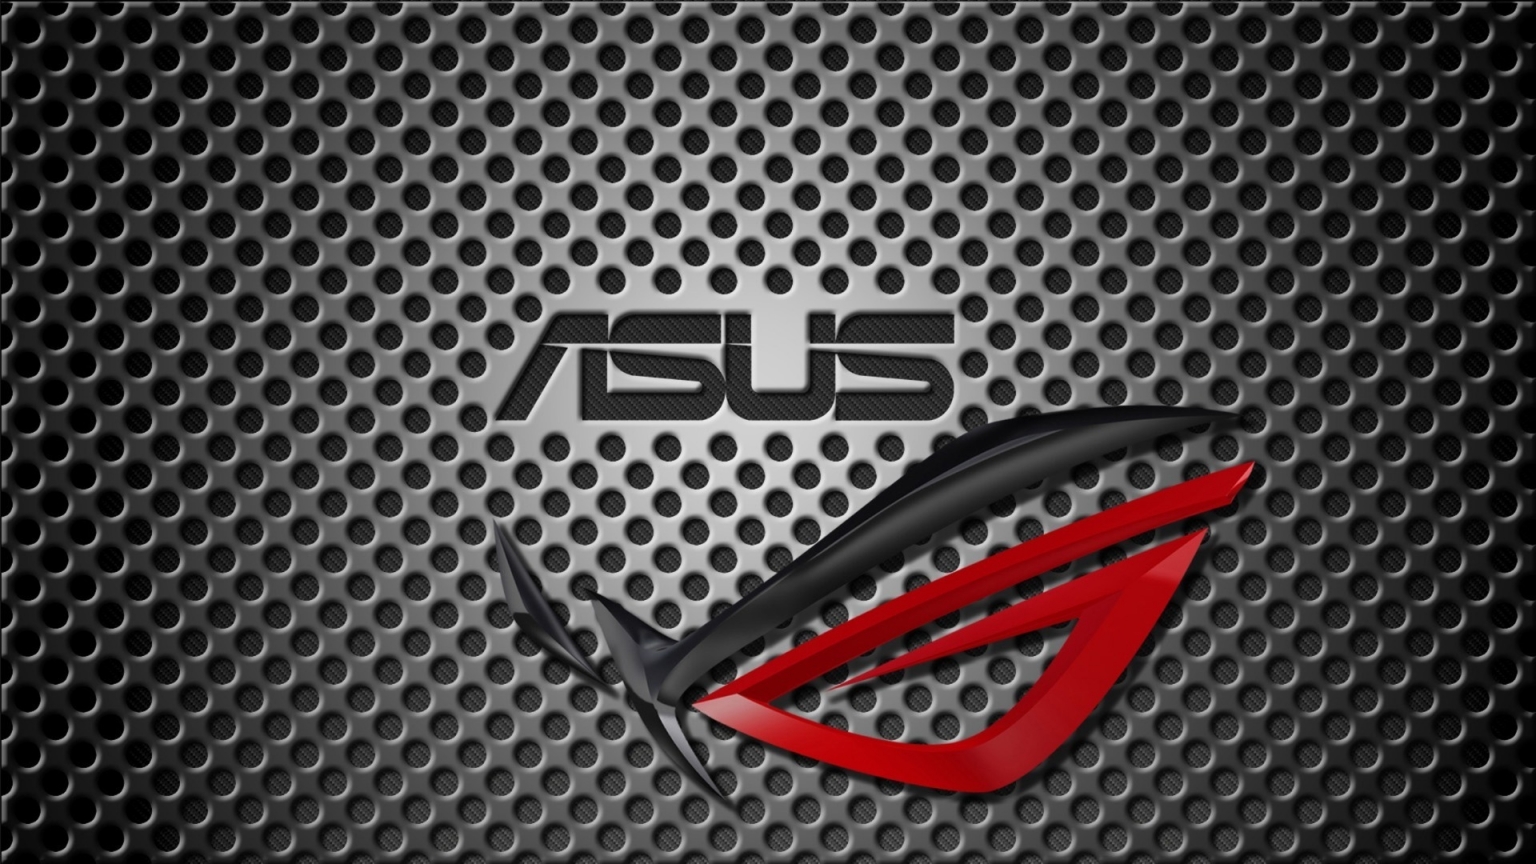 Asus Computer for 1536 x 864 HDTV resolution